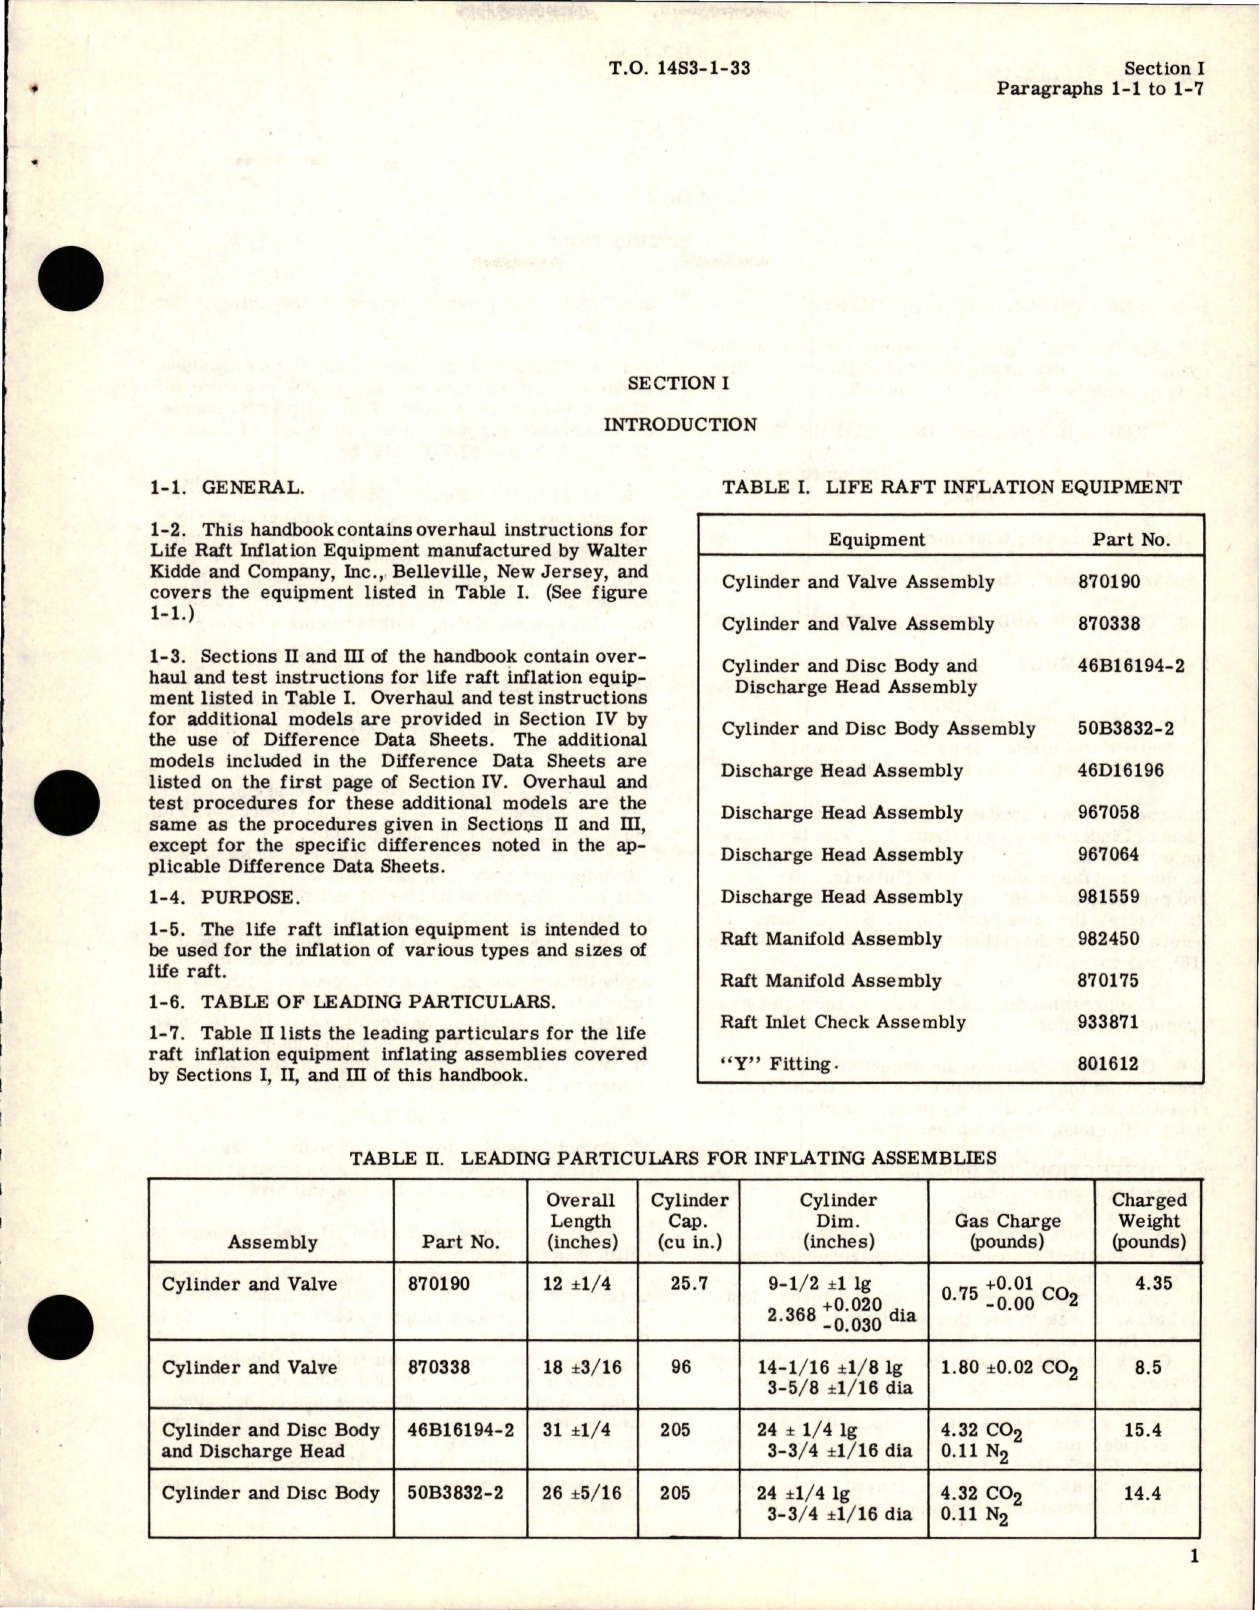 Sample page 5 from AirCorps Library document: Overhaul Instructions for Life Raft Inflation Equipment